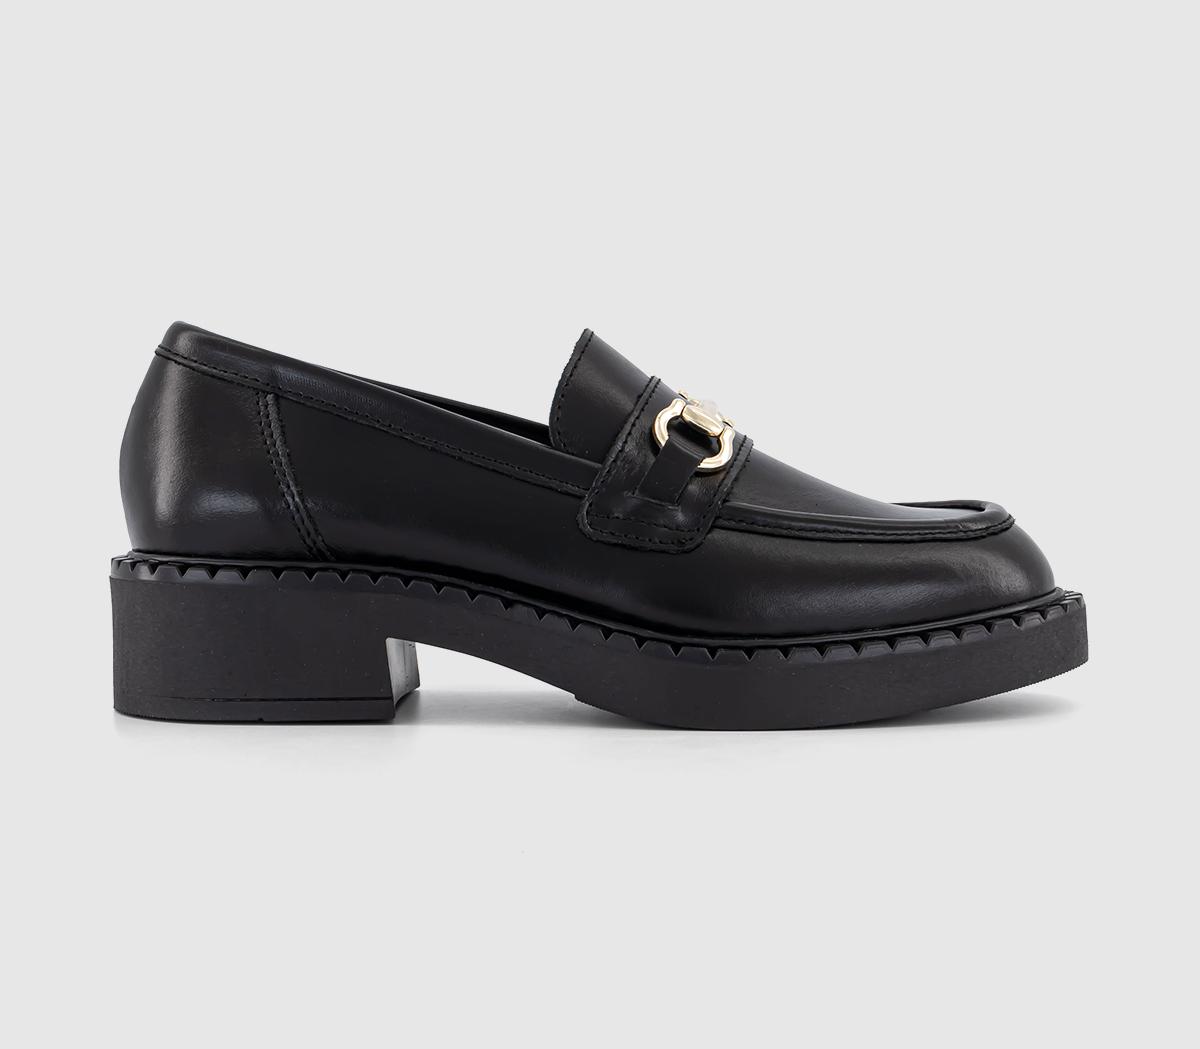 OFFICE Future Chunky Hardware Loafers Black Leather - Flat Shoes for Women